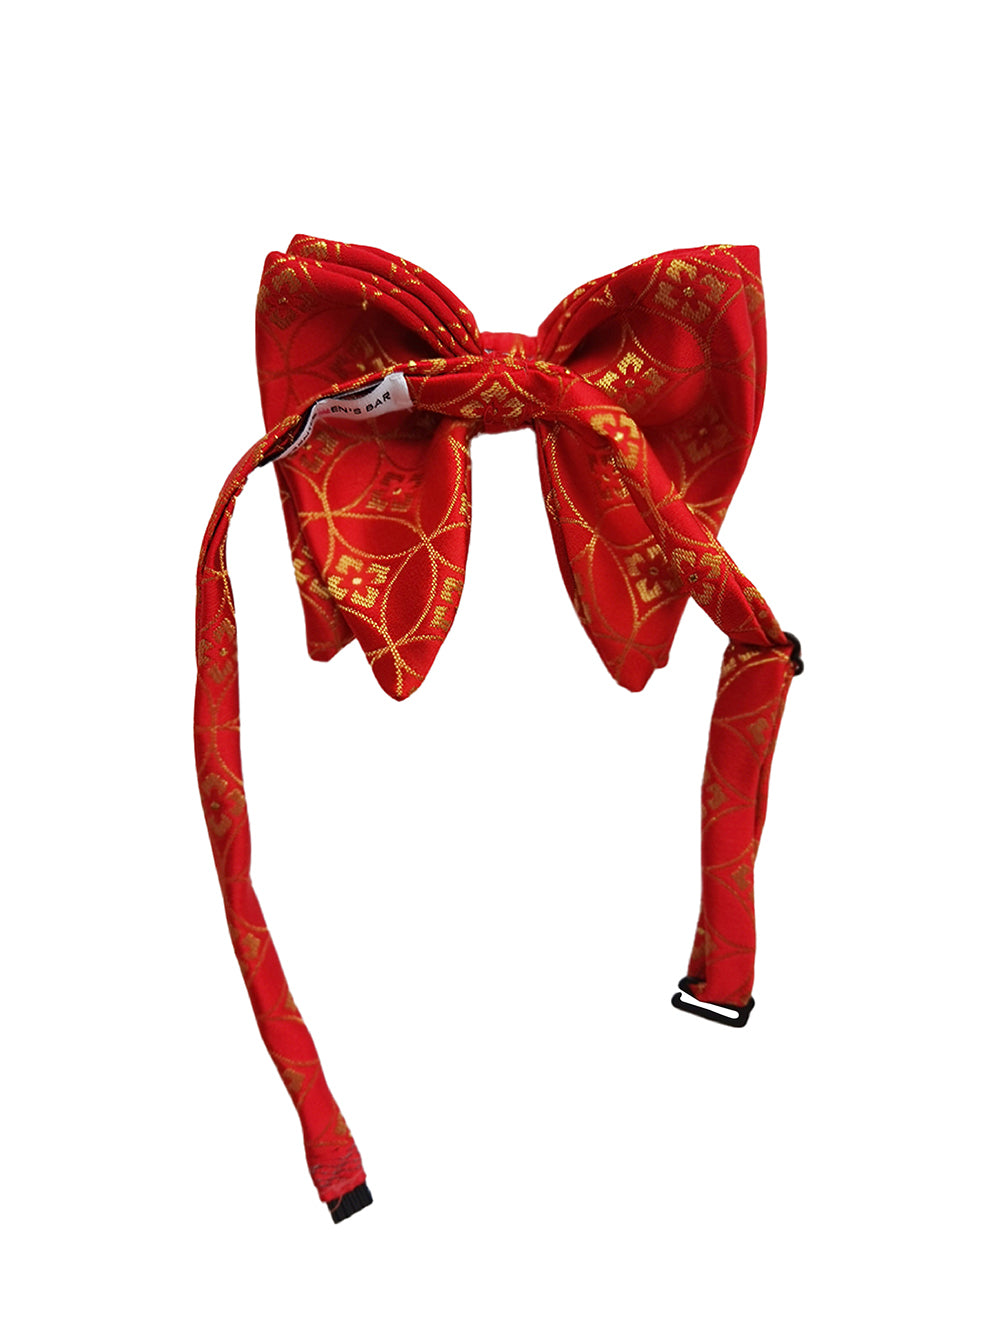 THE TONG QIAN R BOWTIE (BUTTERFLY)